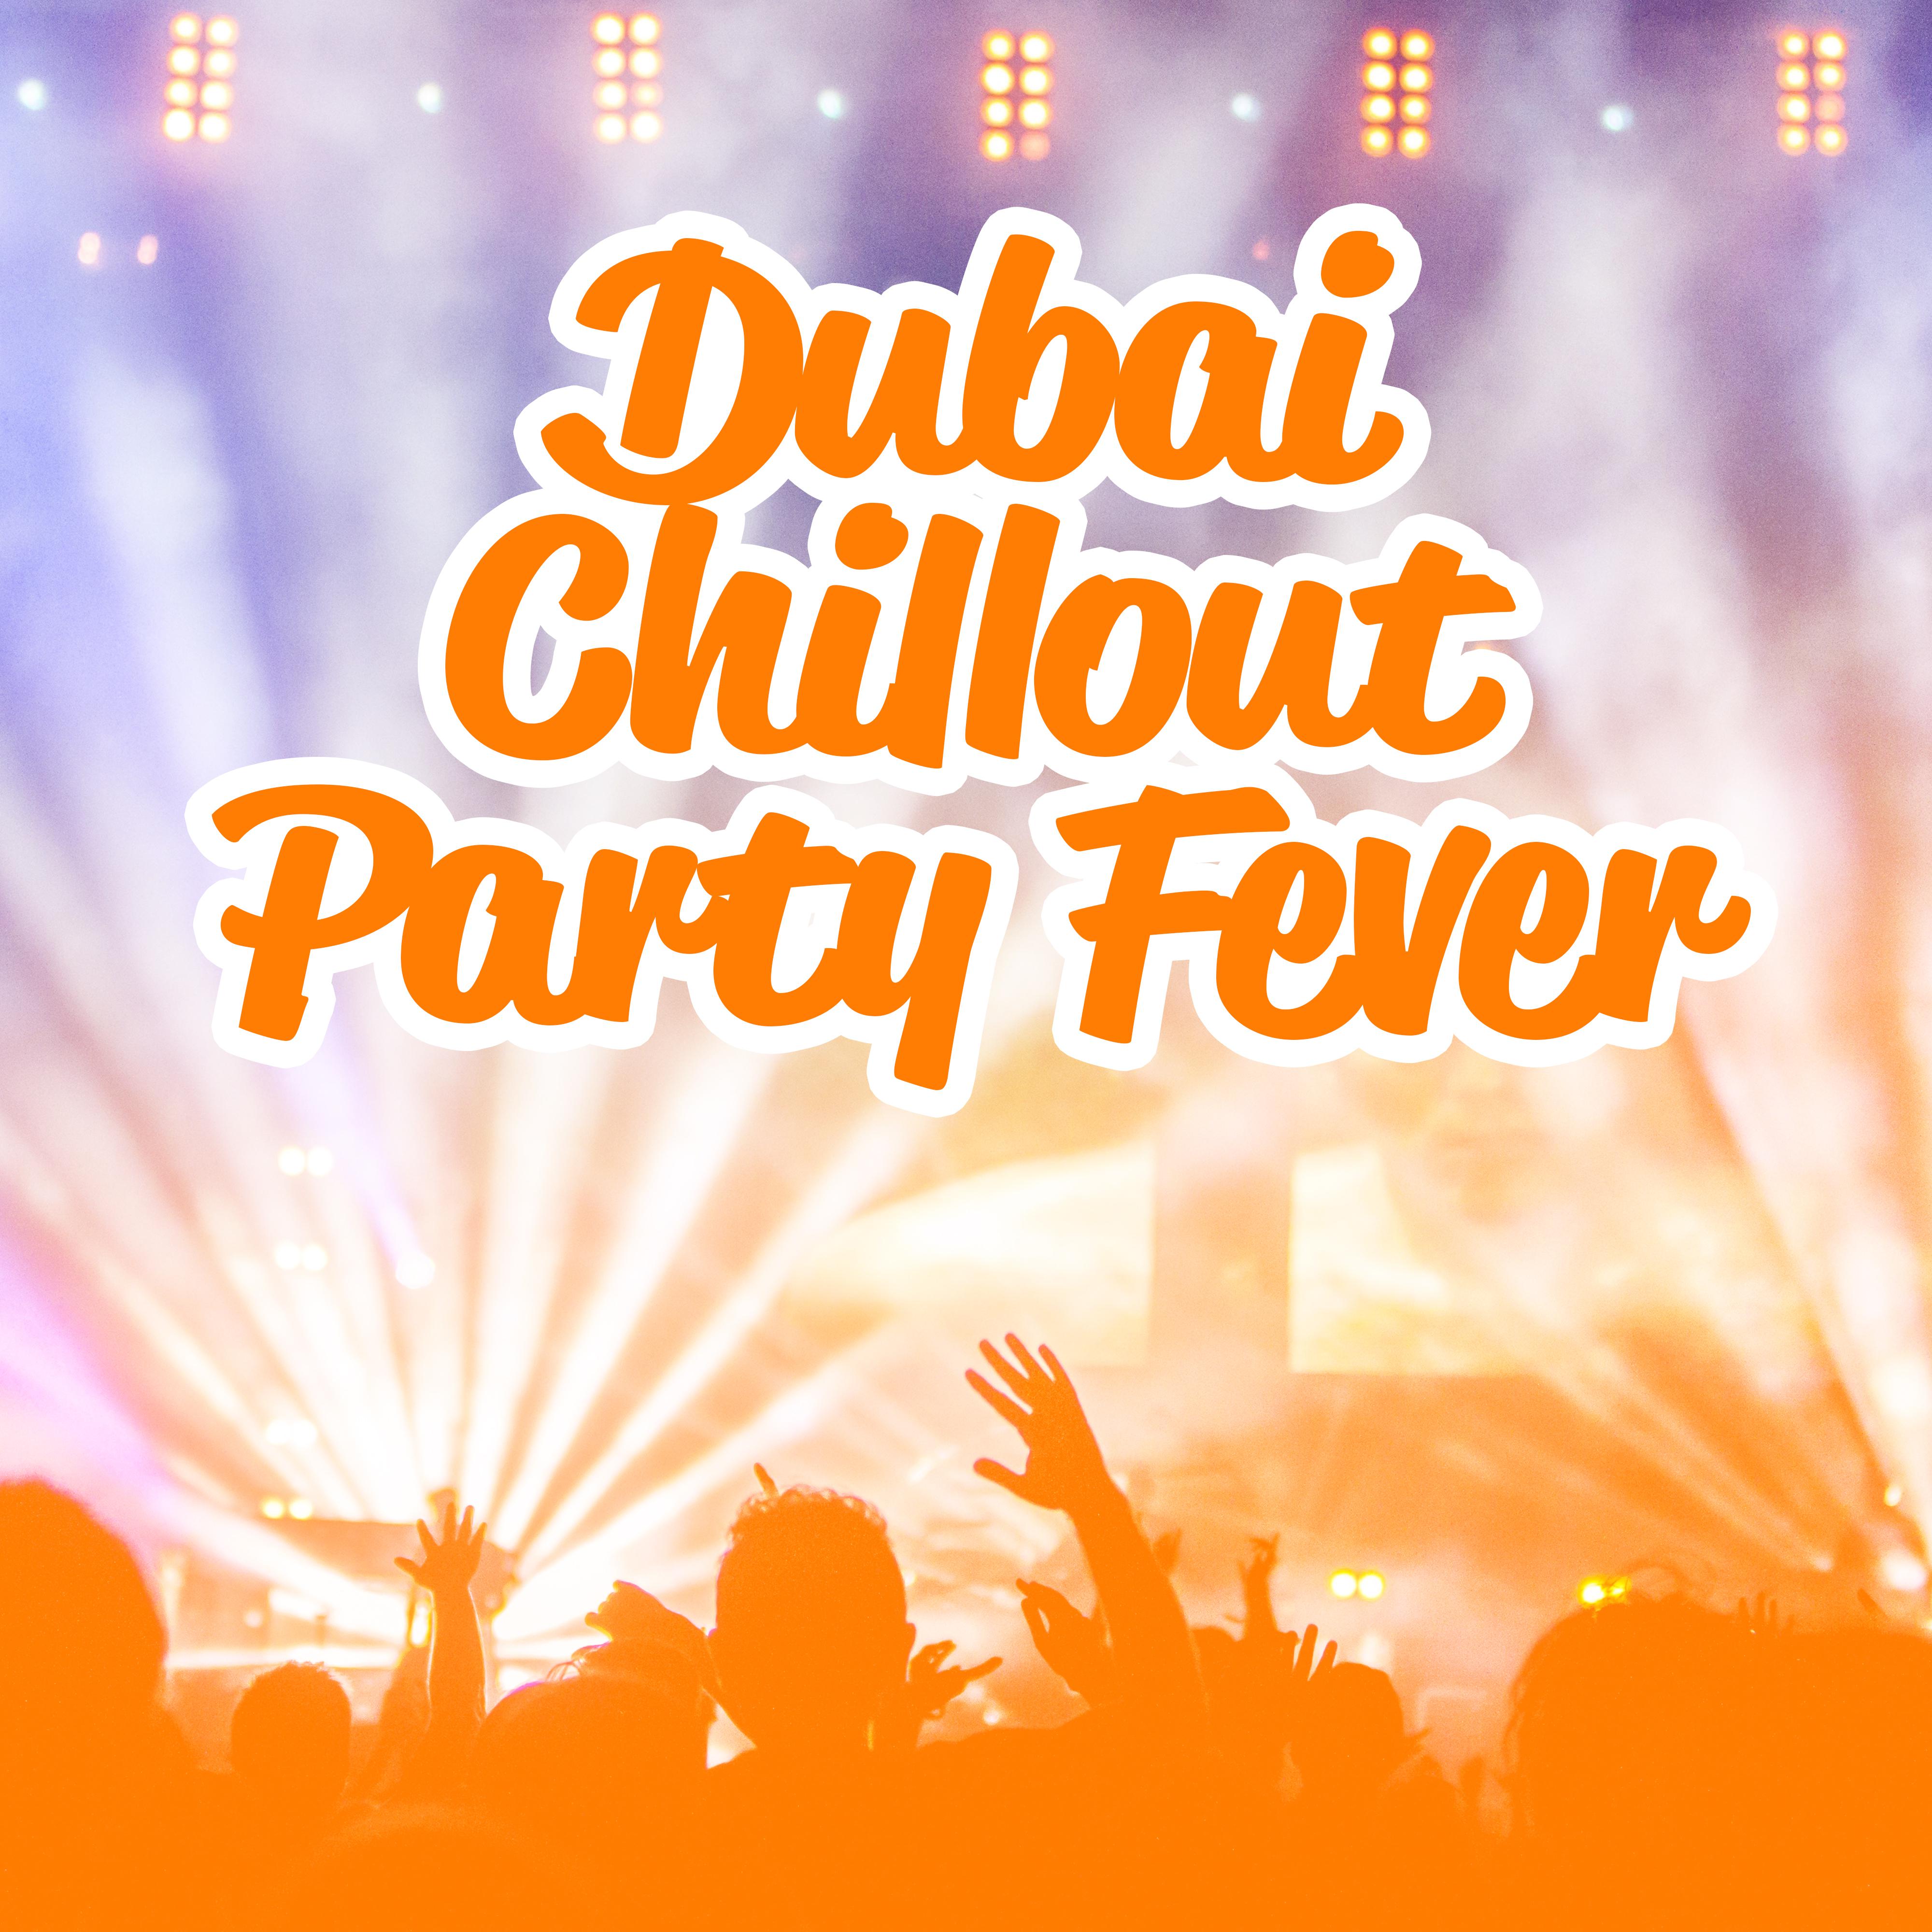 Dubai Chillout Party Fever – Hot Electronic Party Beats Mix 2019